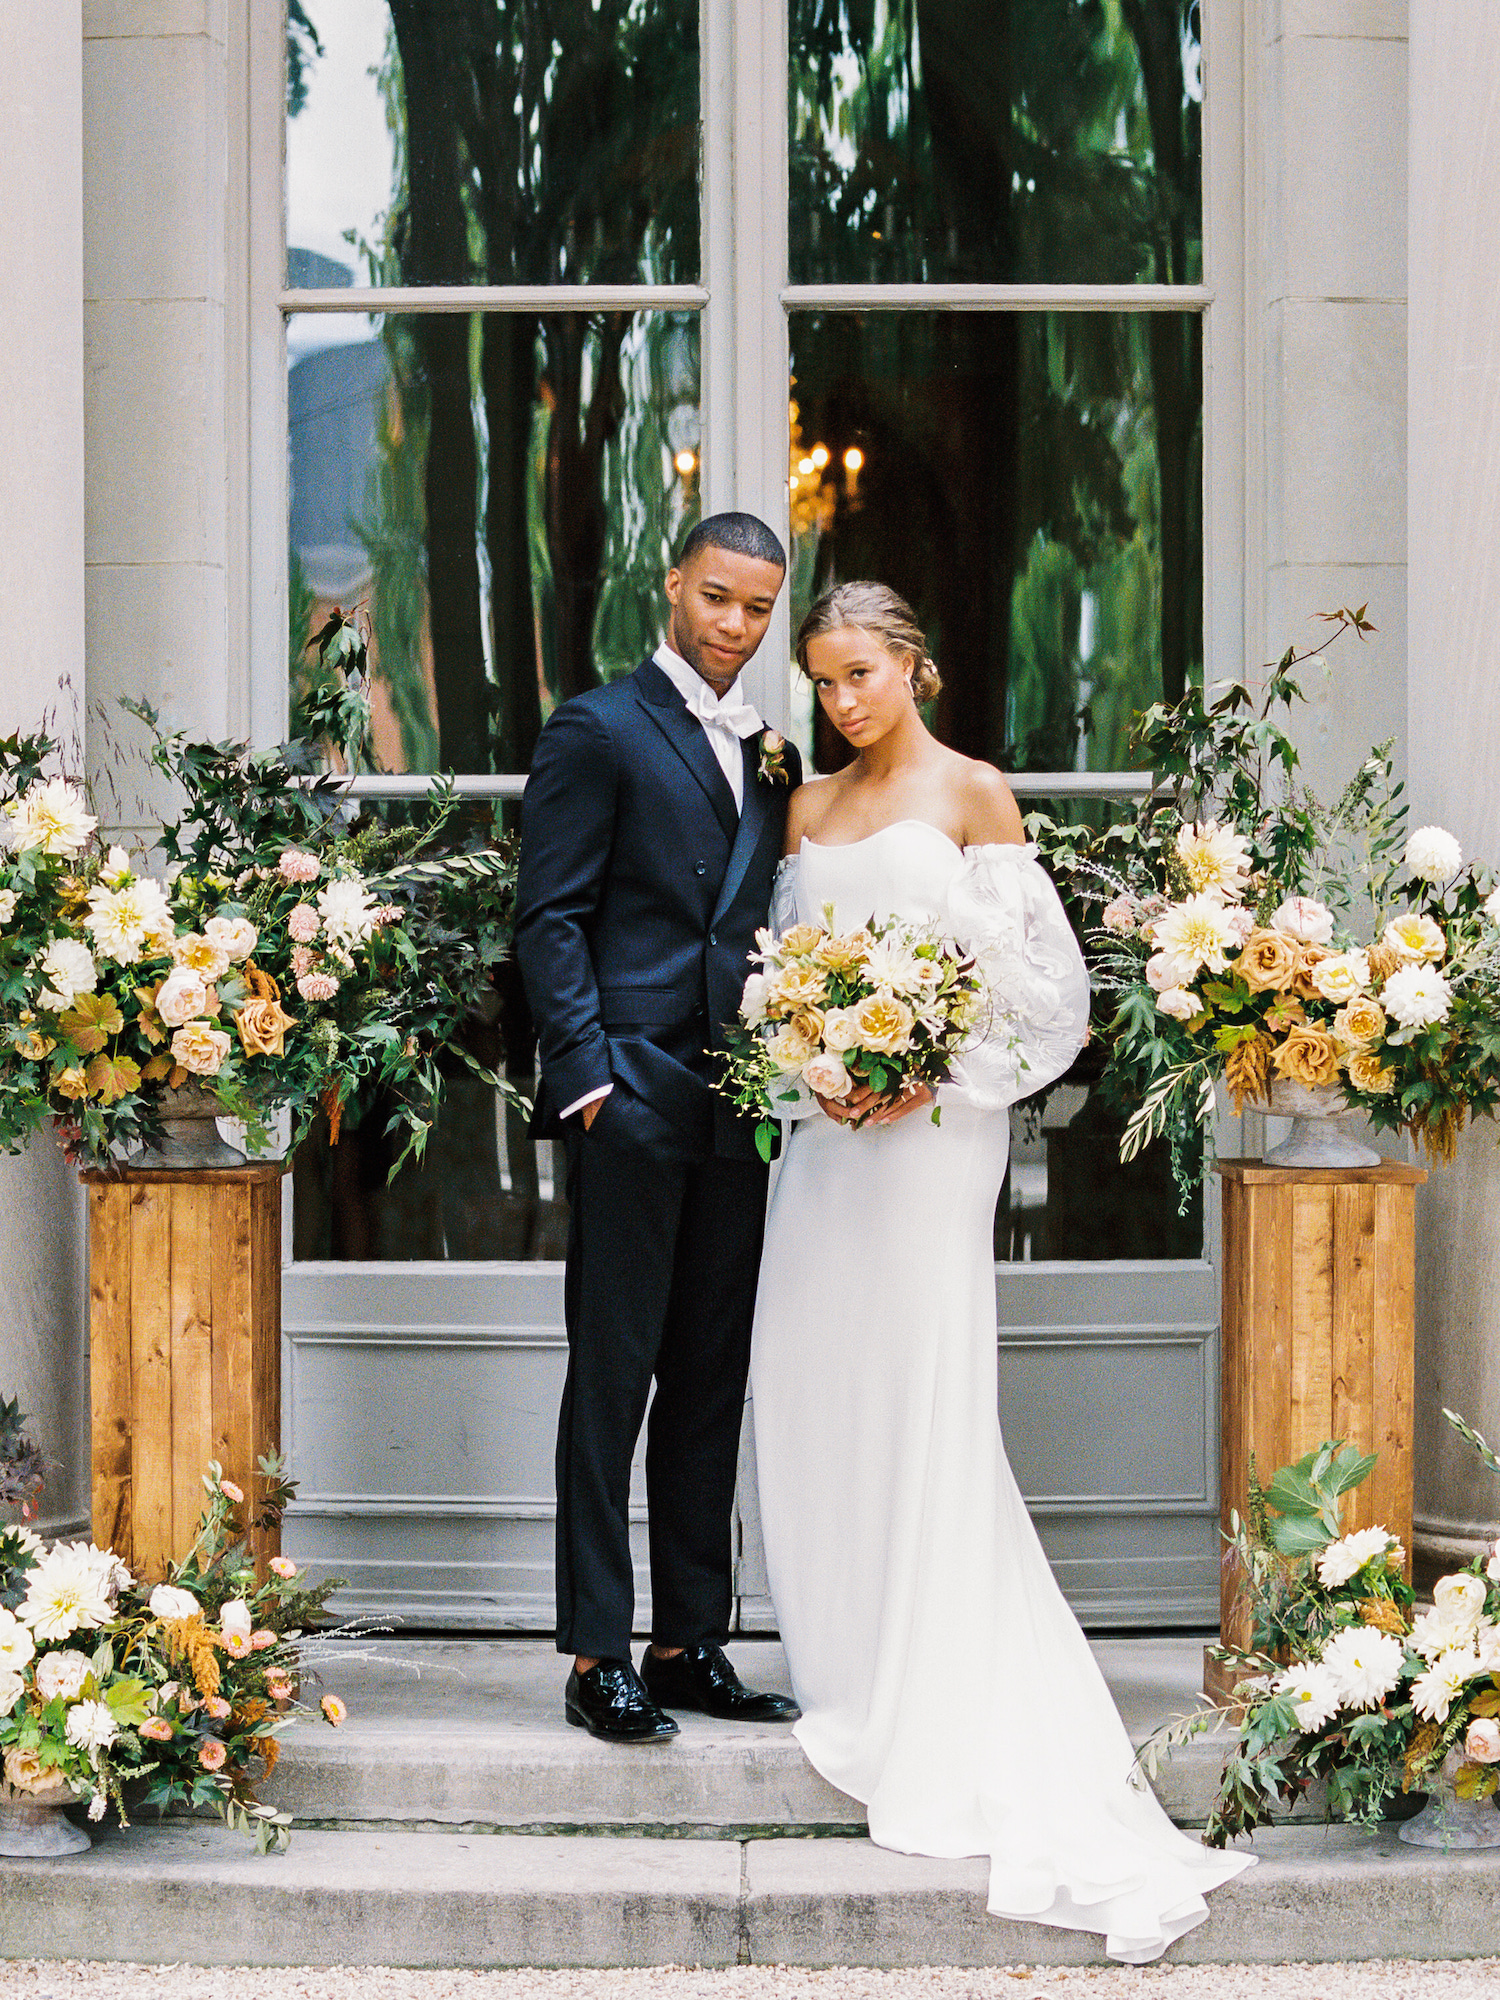 A bride and groom pose in front of one of the top 9 luxury wedding venues in Washington DC. Image by Victoria Heer, fine art wedding photographer.